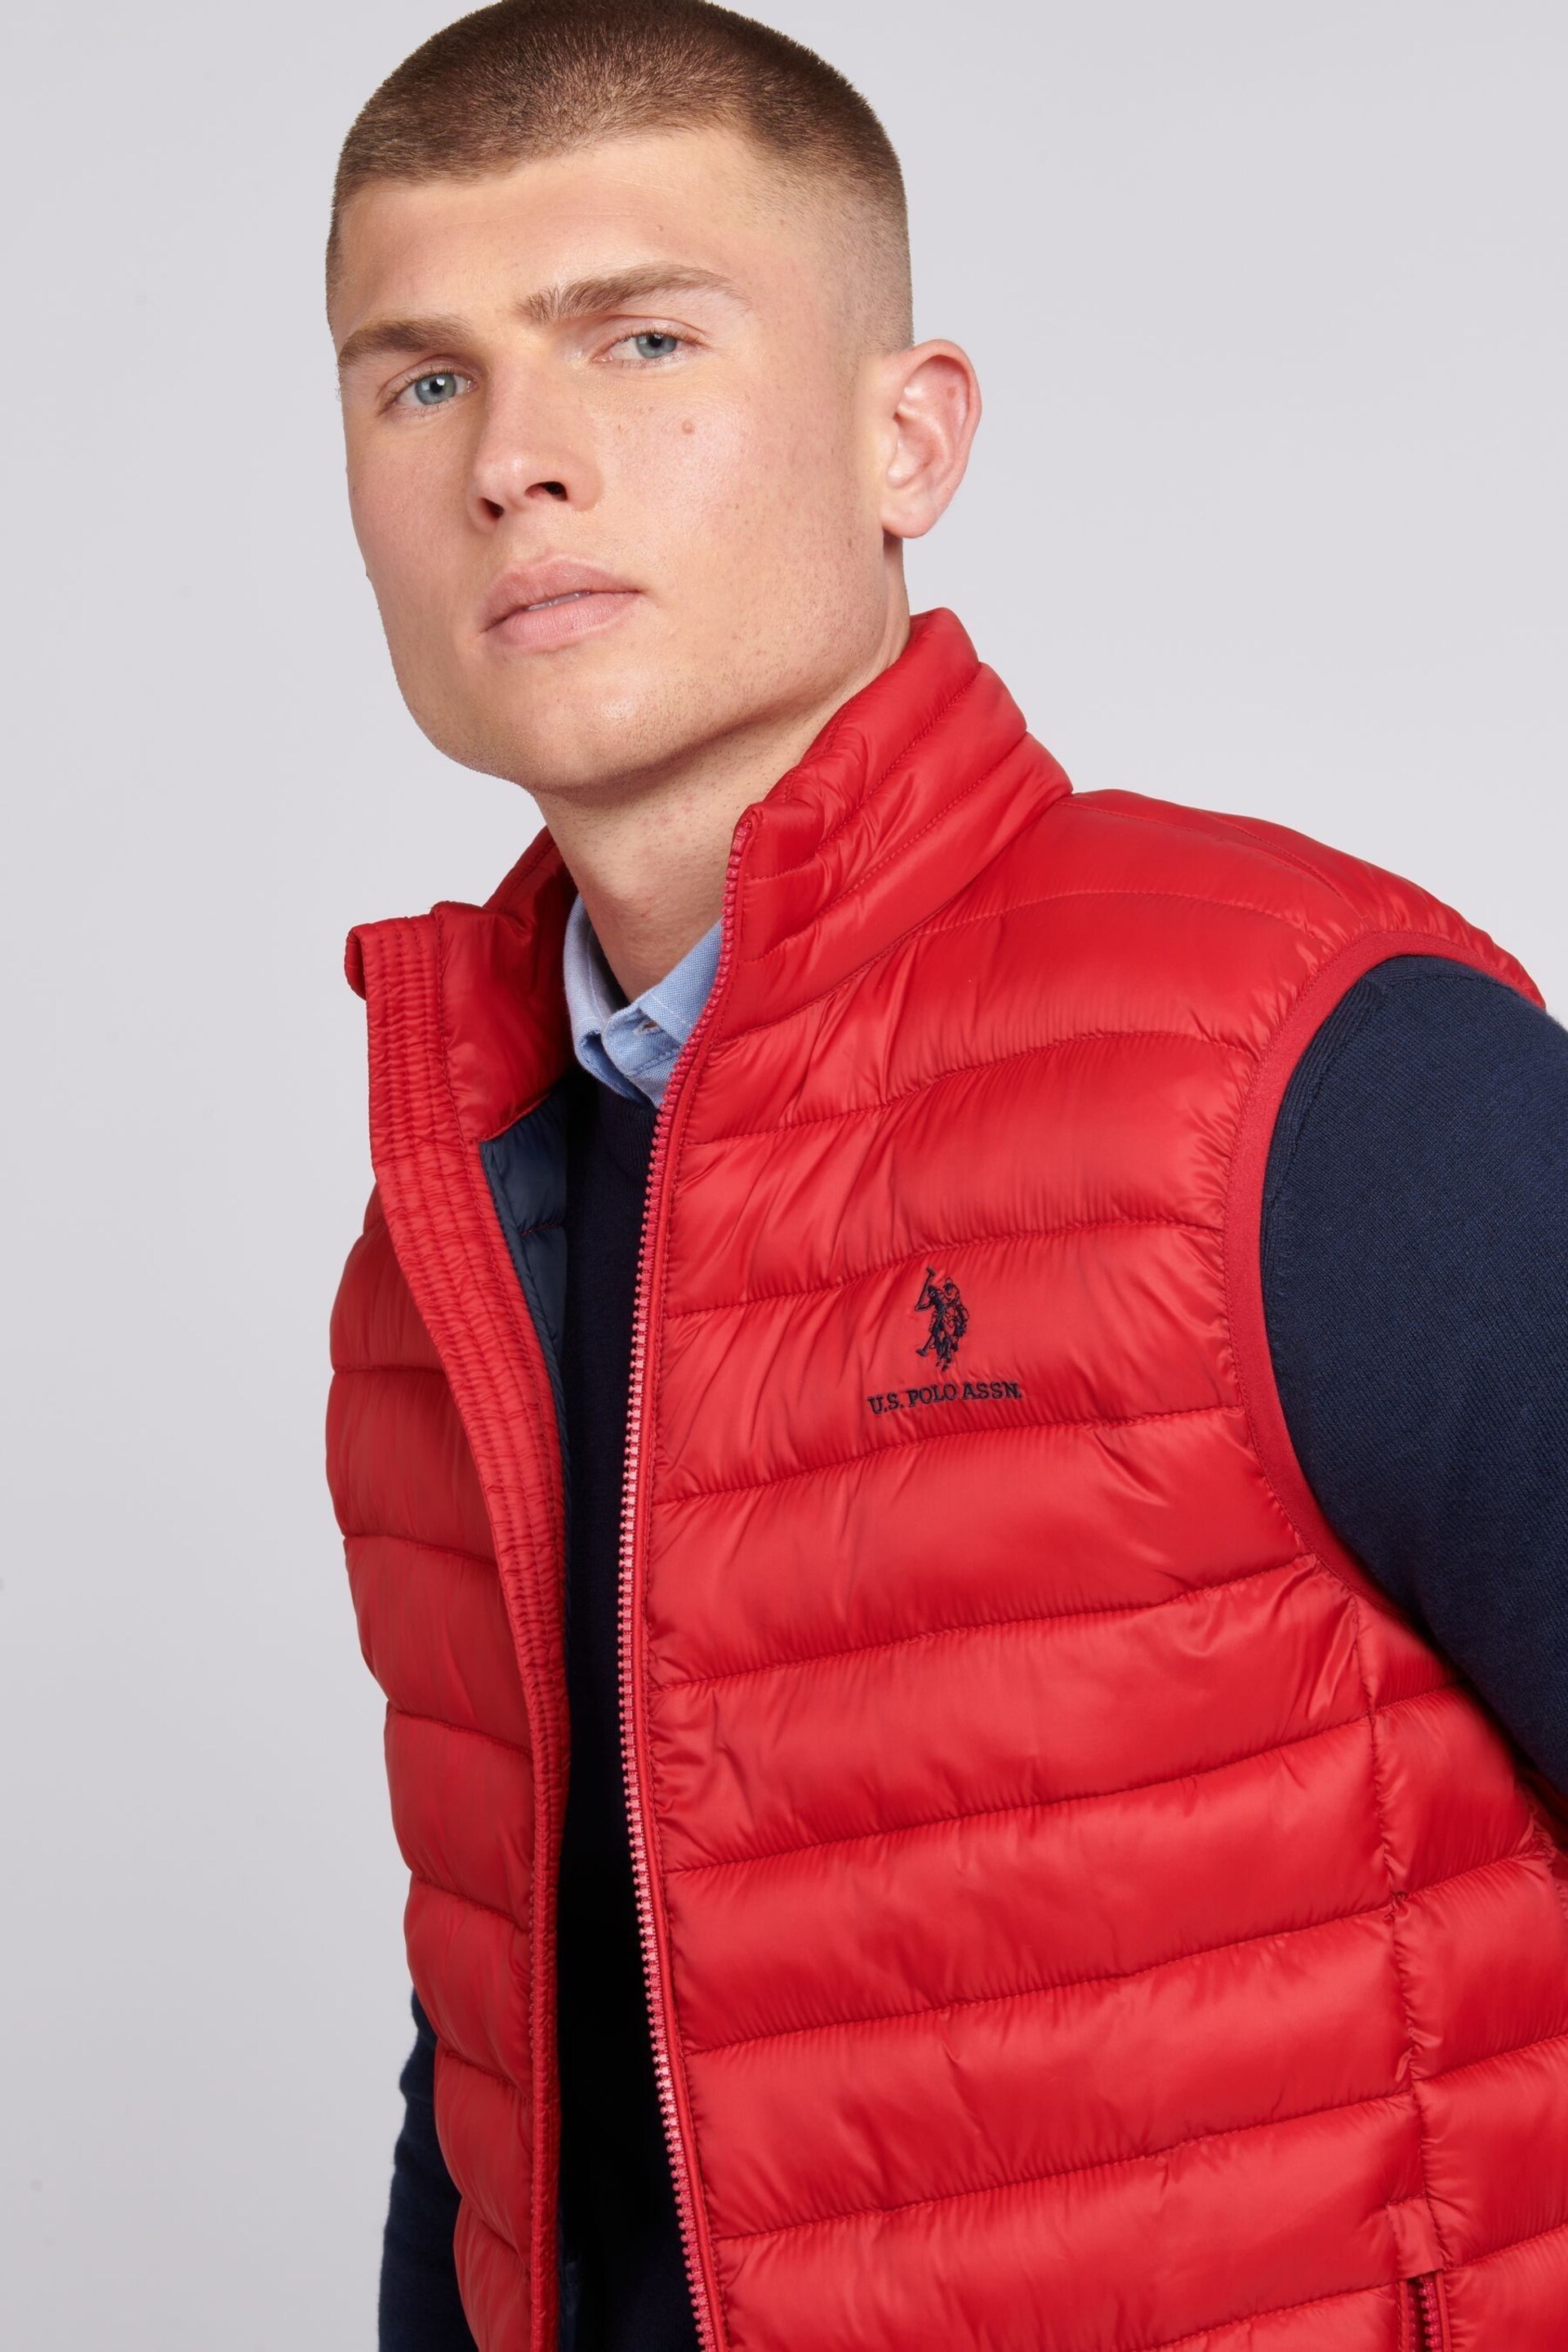 U.S. Polo Assn. Mens Bound Quilted Gilet - Image 2 of 7